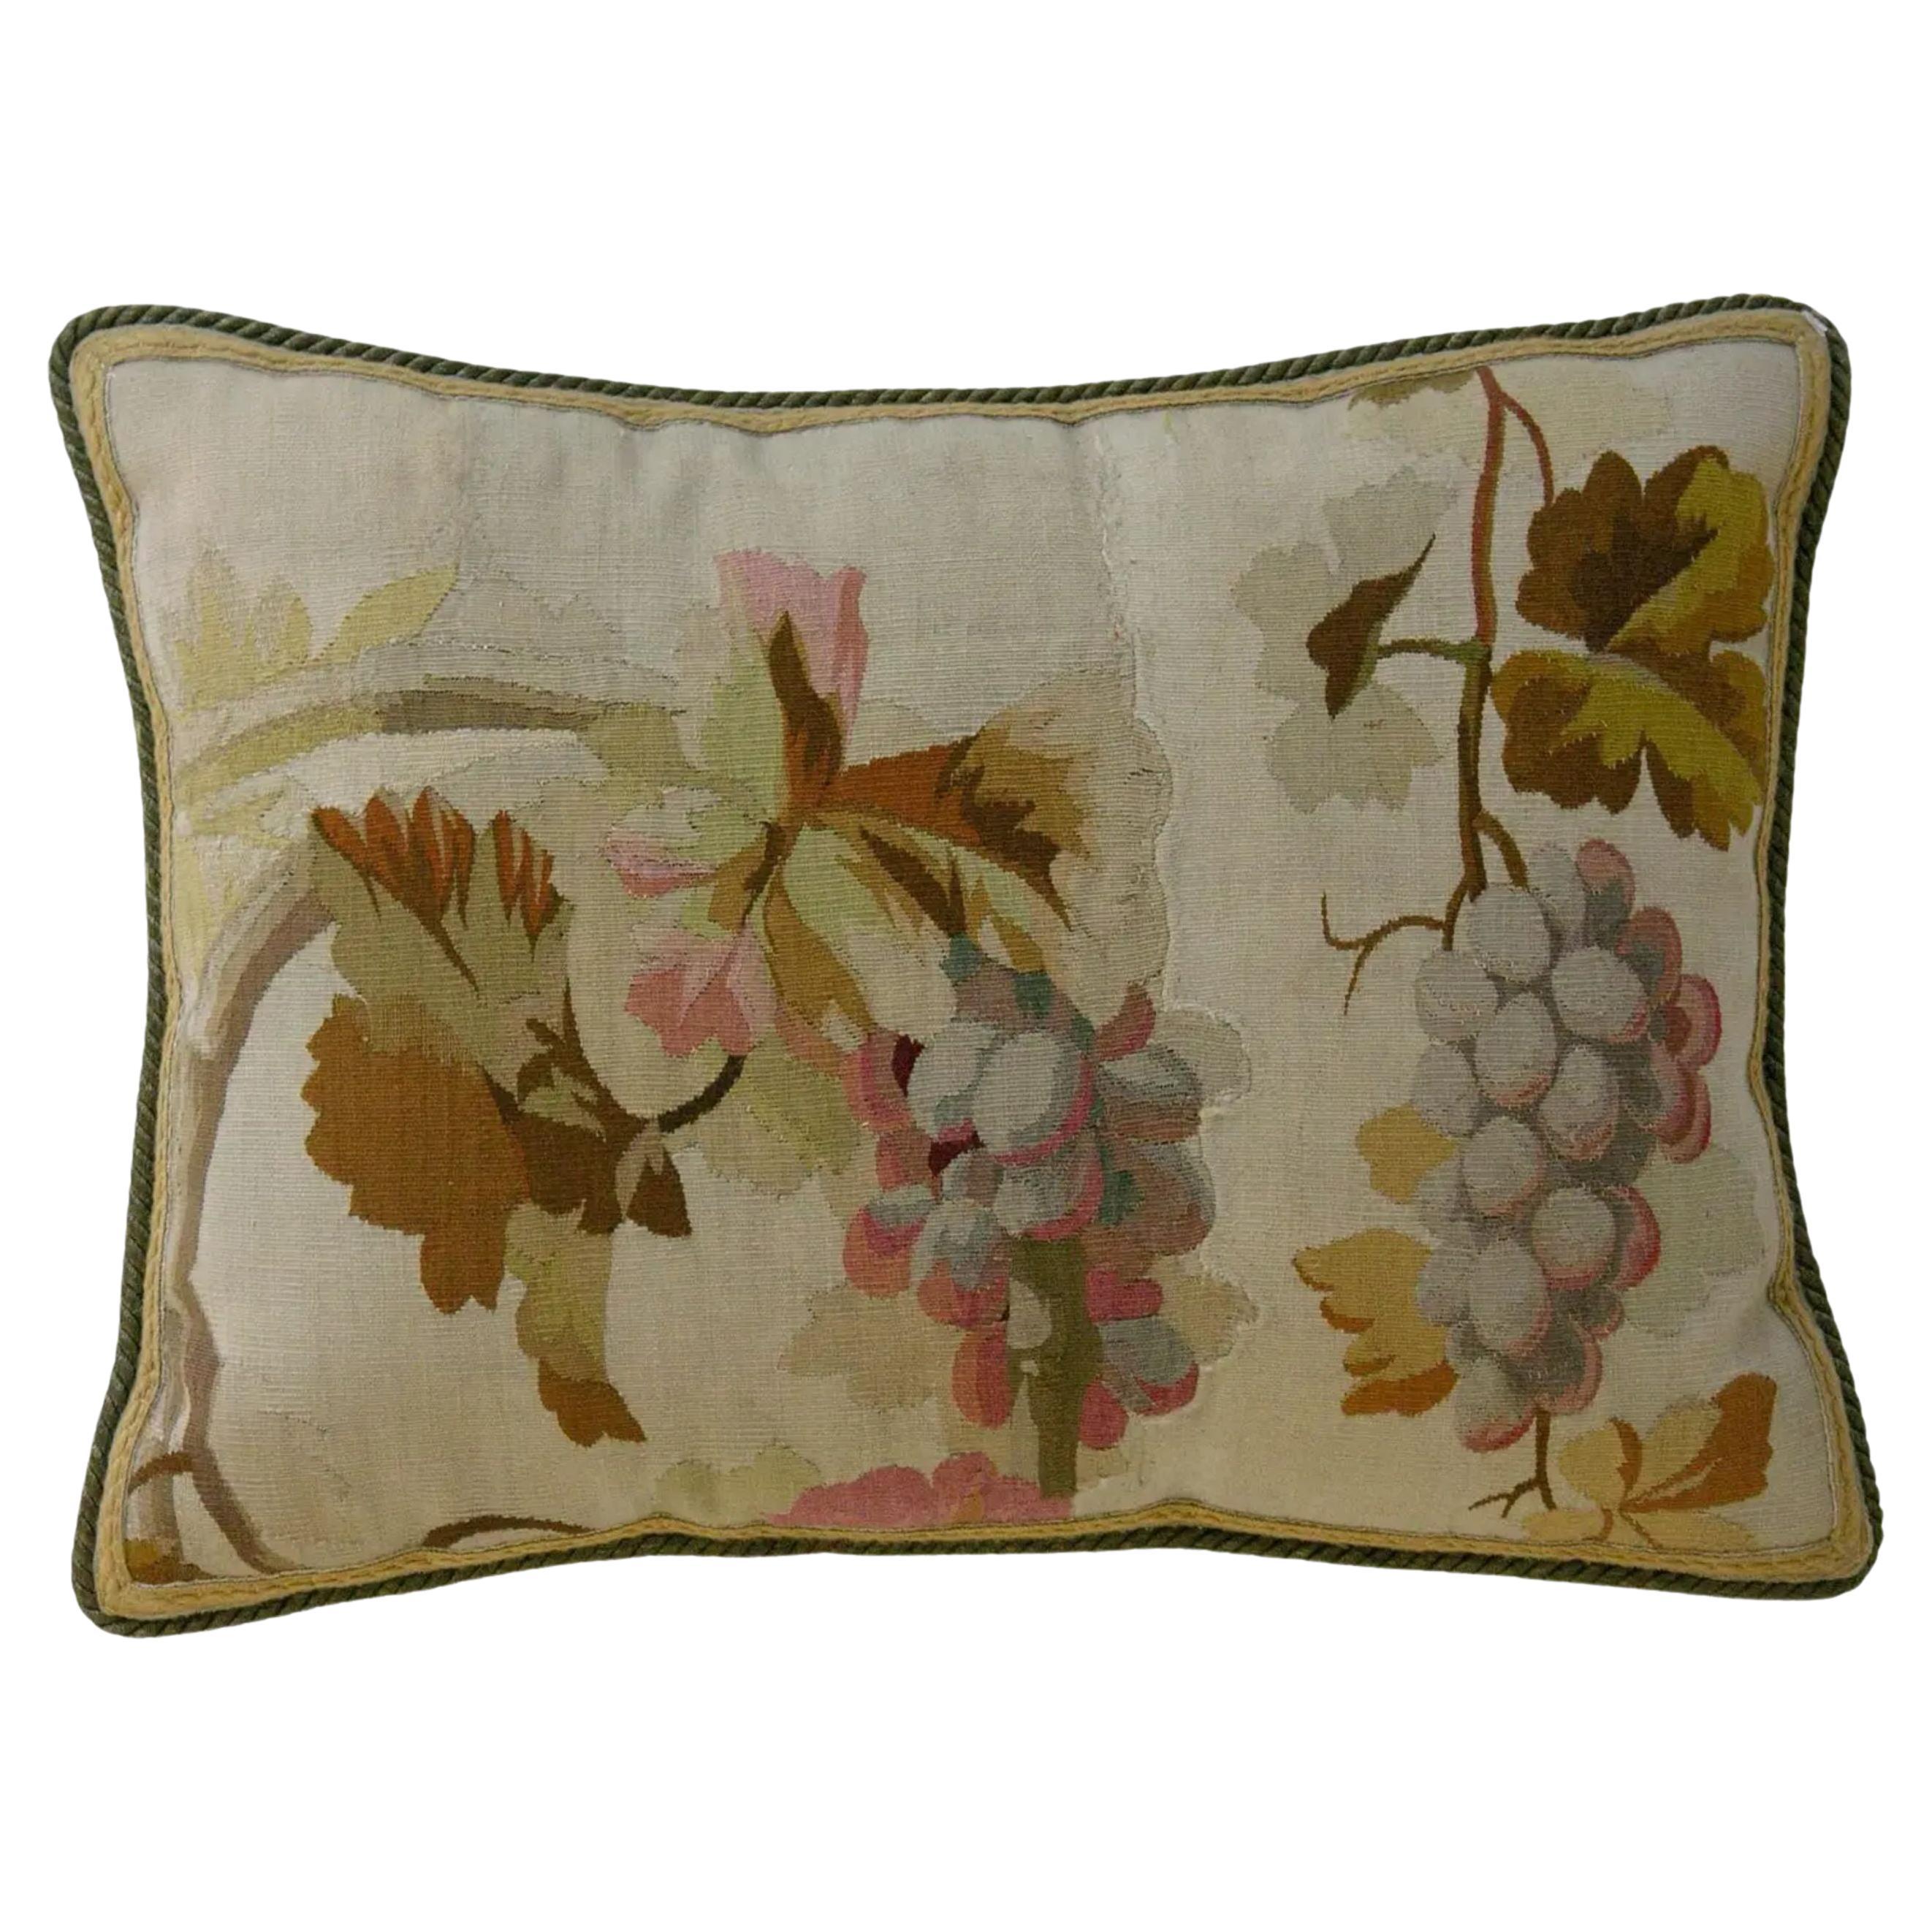 1800 Antique French Aubusson Tapestry Pillow With Grapes on Ivory Background - 2